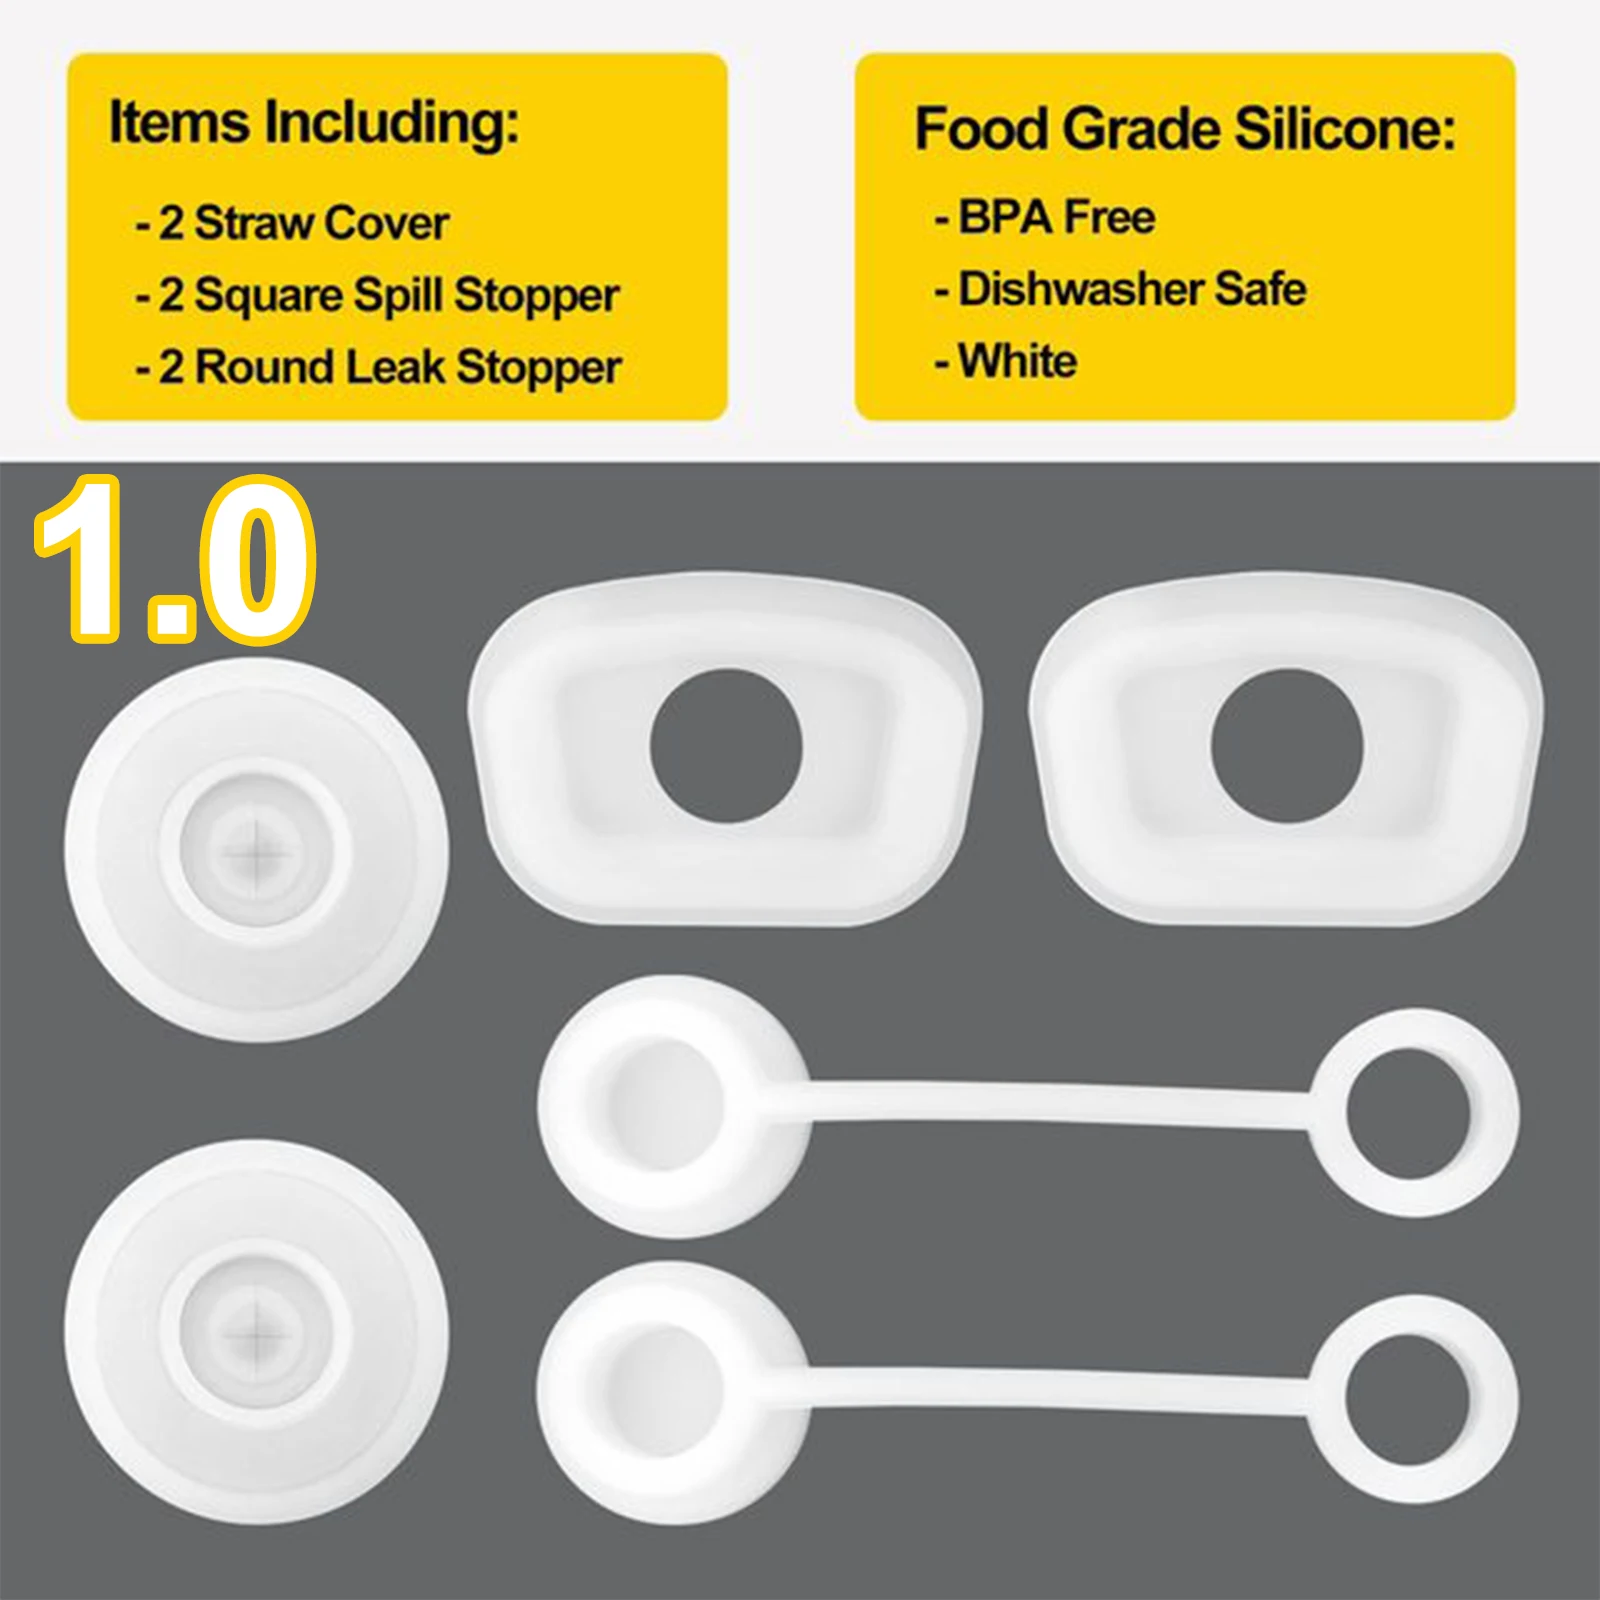 https://ae01.alicdn.com/kf/Sa552062b92c54be6bdd950221241c6e7p/Silicone-Spill-Proof-Stopper-Set-of-6-Compatible-for-Stanley-Cup-1-0-2-0-40oz.jpg